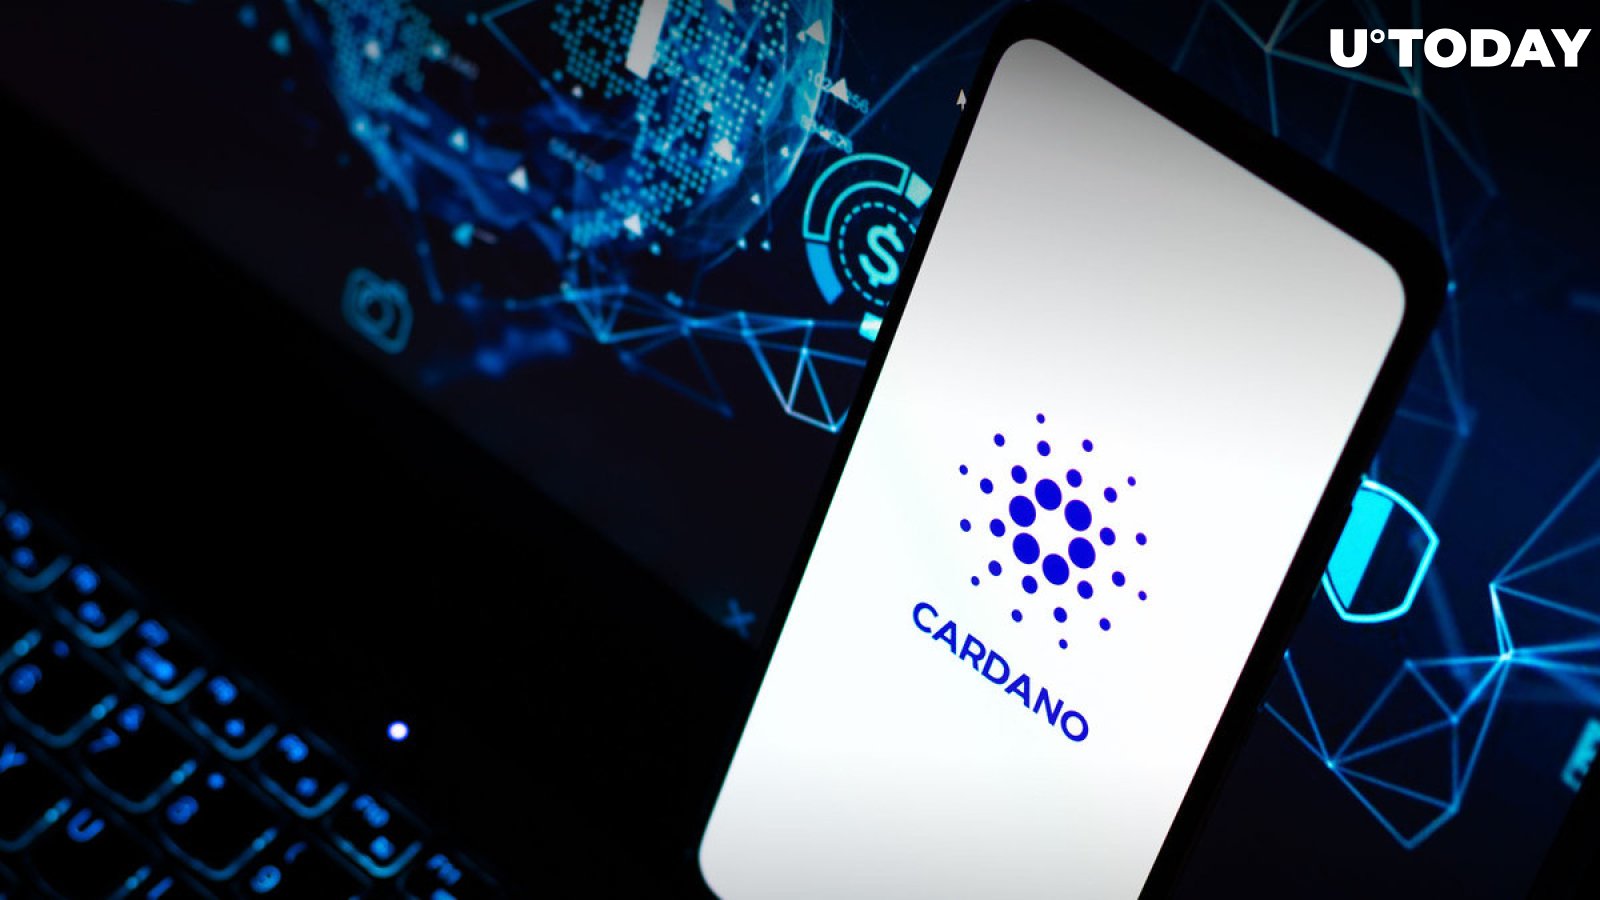 Cardano Network Activity Spikes on FTX Crash, Here's Detailed Insight